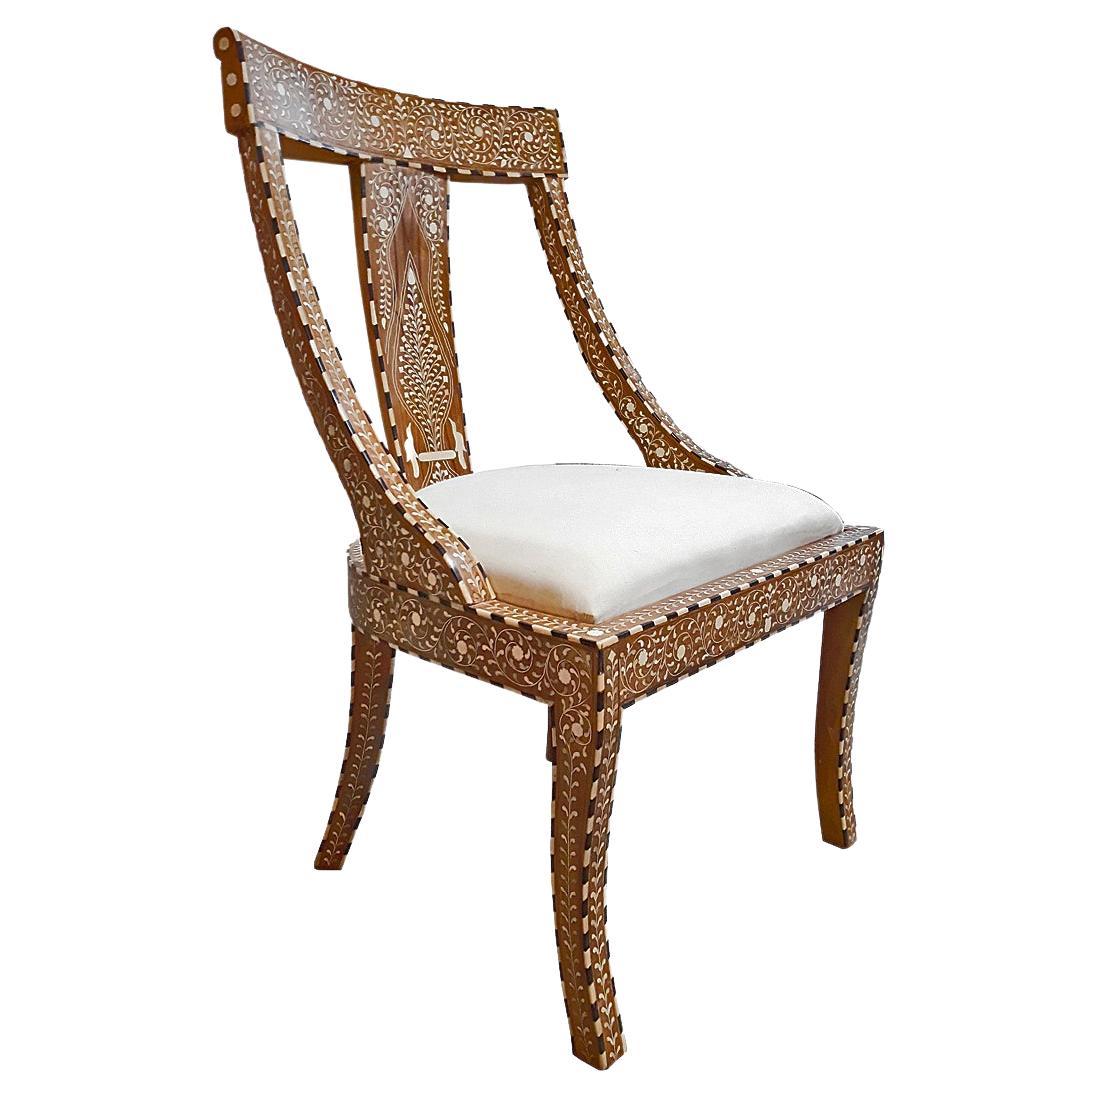 An armless chair from India, hand-crafted by Jaipur artisans in aged teak wood with traditional bone inlays throughout and a removable seat crafted in basic muslin, that can be upholstered to any desired fabric (1 yard COM needed). 

Inlay is